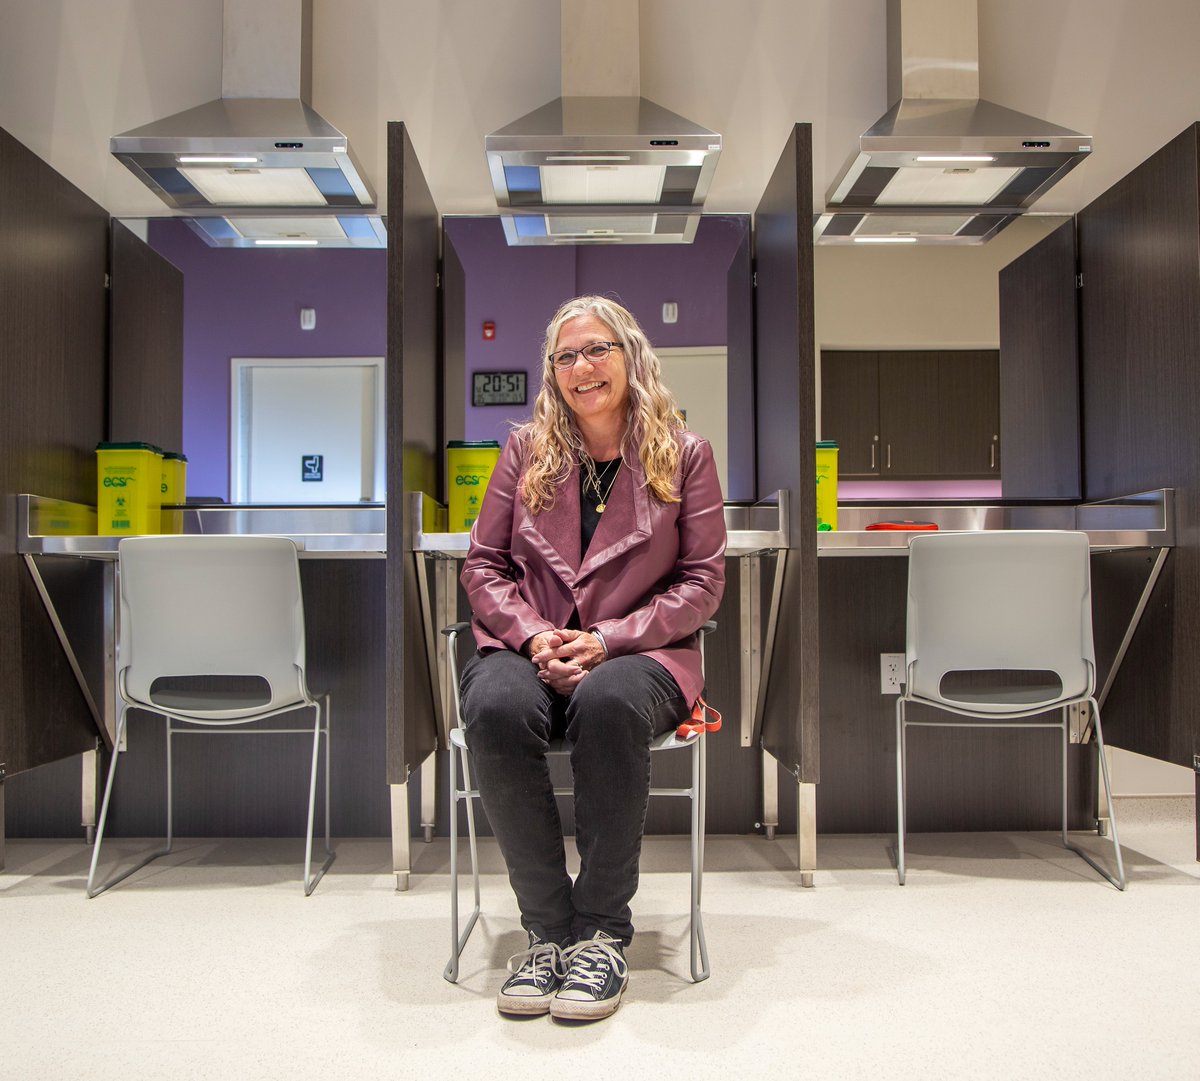 It took five years of approvals, setbacks, legal fights and pandemic curveballs, but London’s most marginalized now have a place built just for them. @JenatLFPress takes a look at the city's set-to-open permanent supervised drug-use facility: tinyurl.com/4h5zjn5u #ldnont